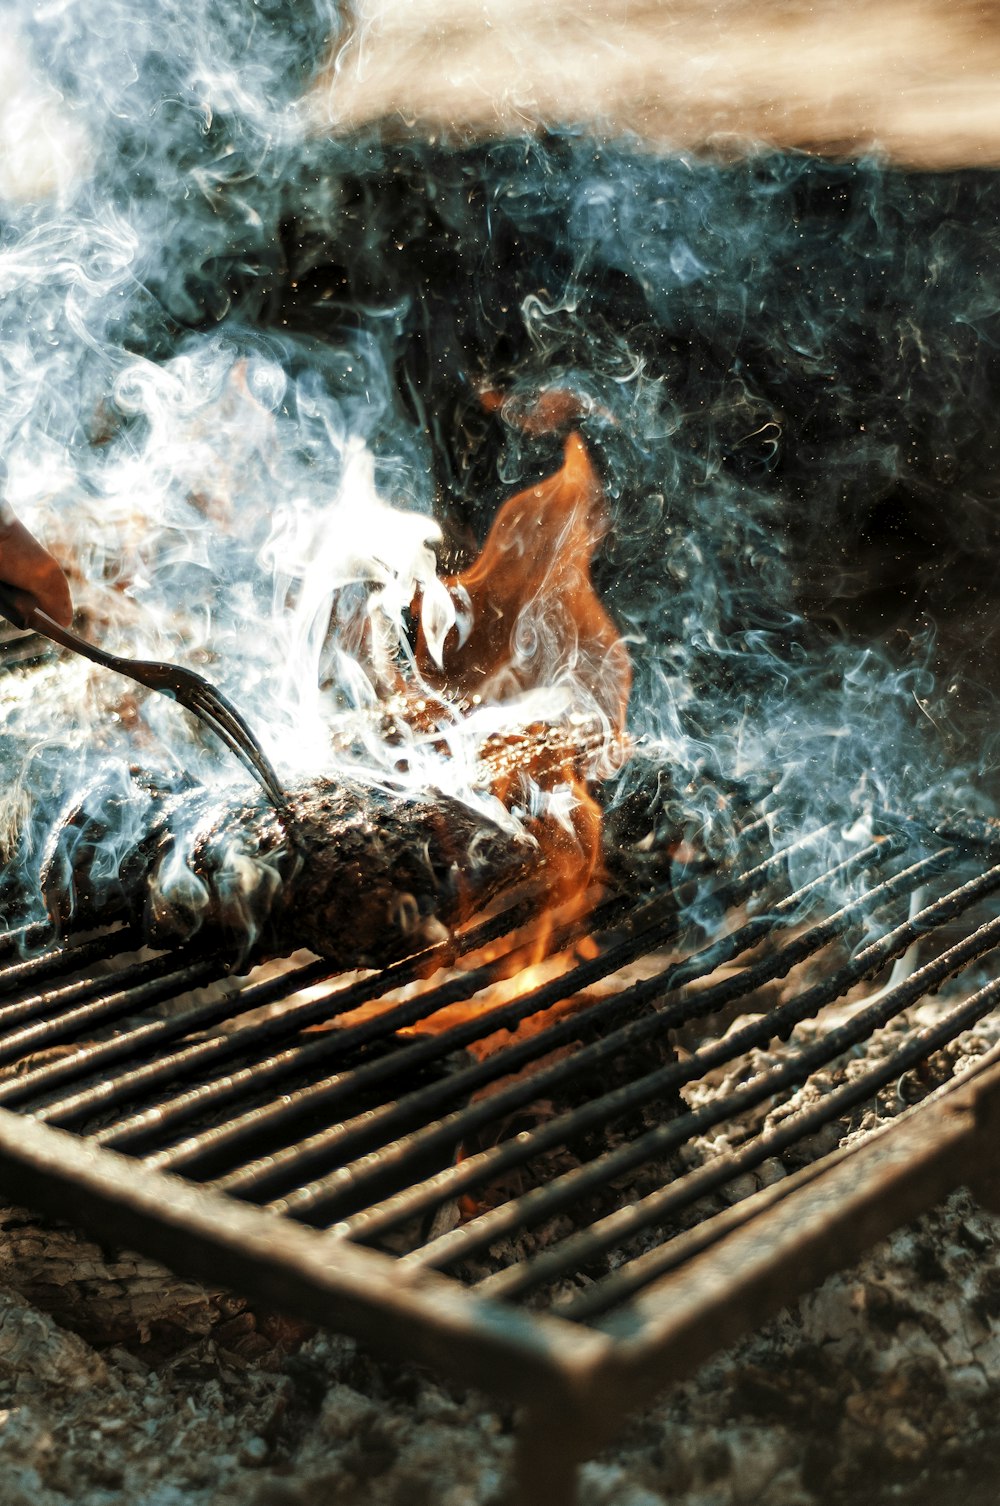 person cooking on grill with fire